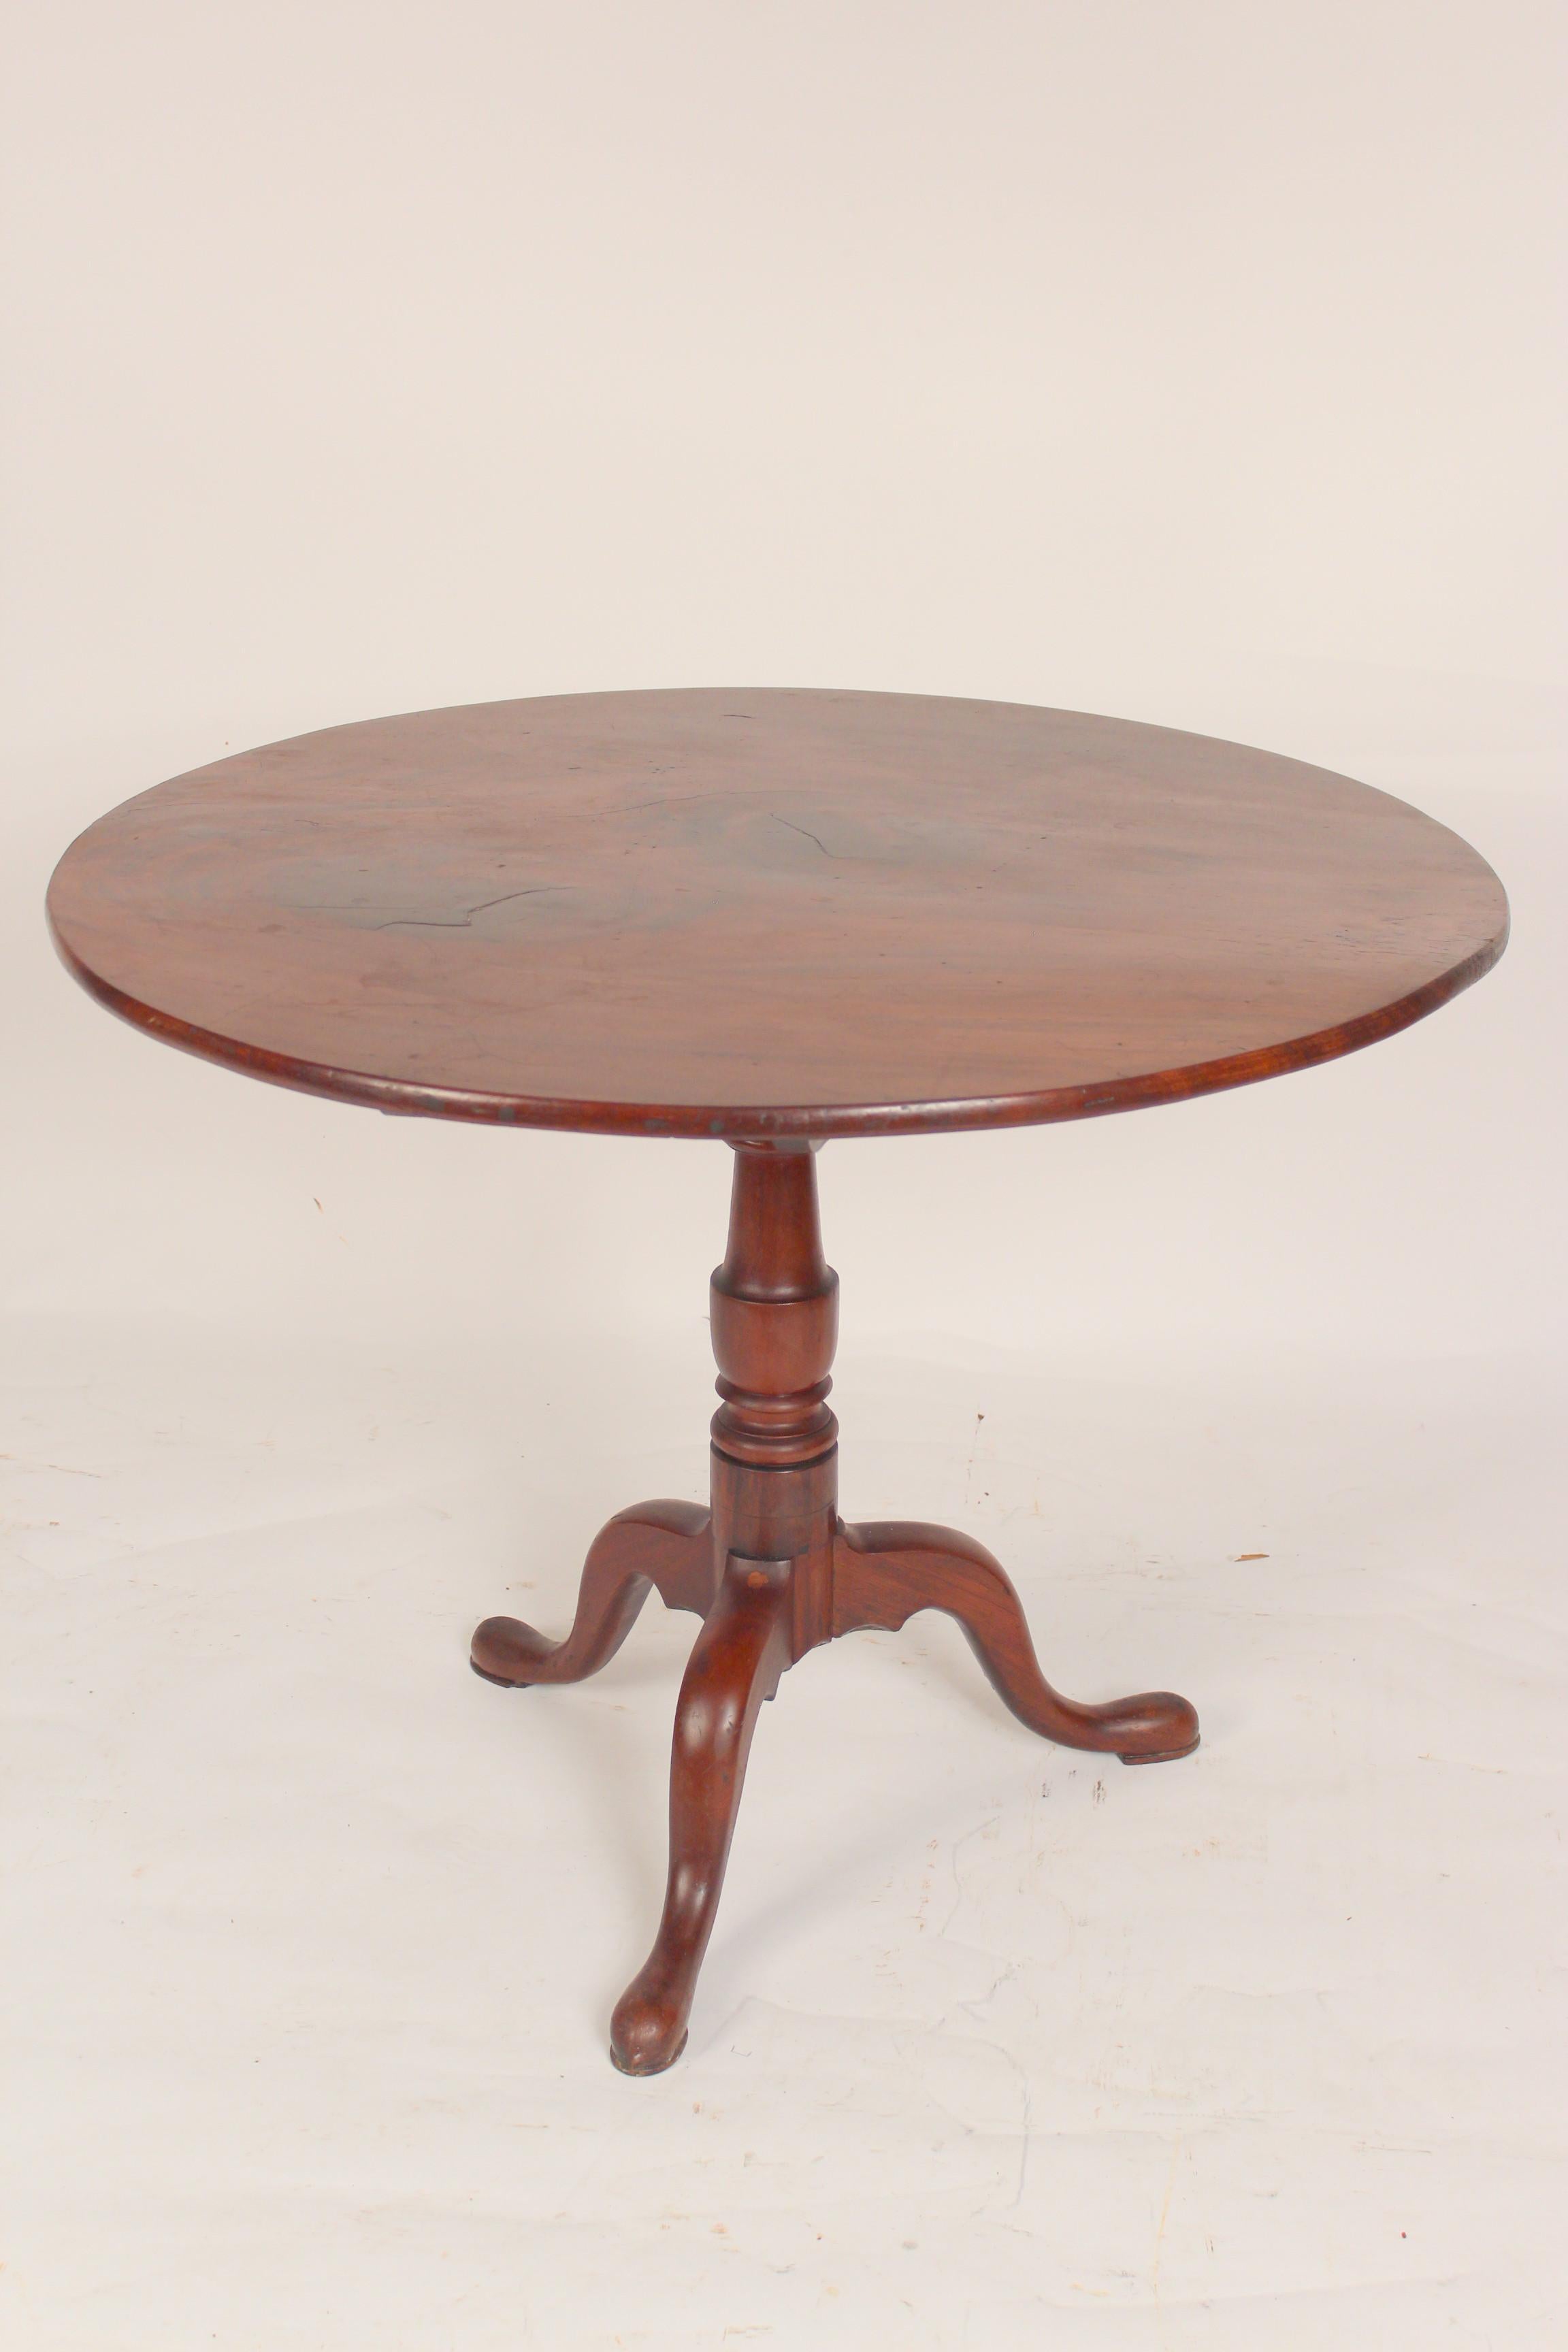 George III mahogany tilt top table, late 18th century. With a nicely figured 37